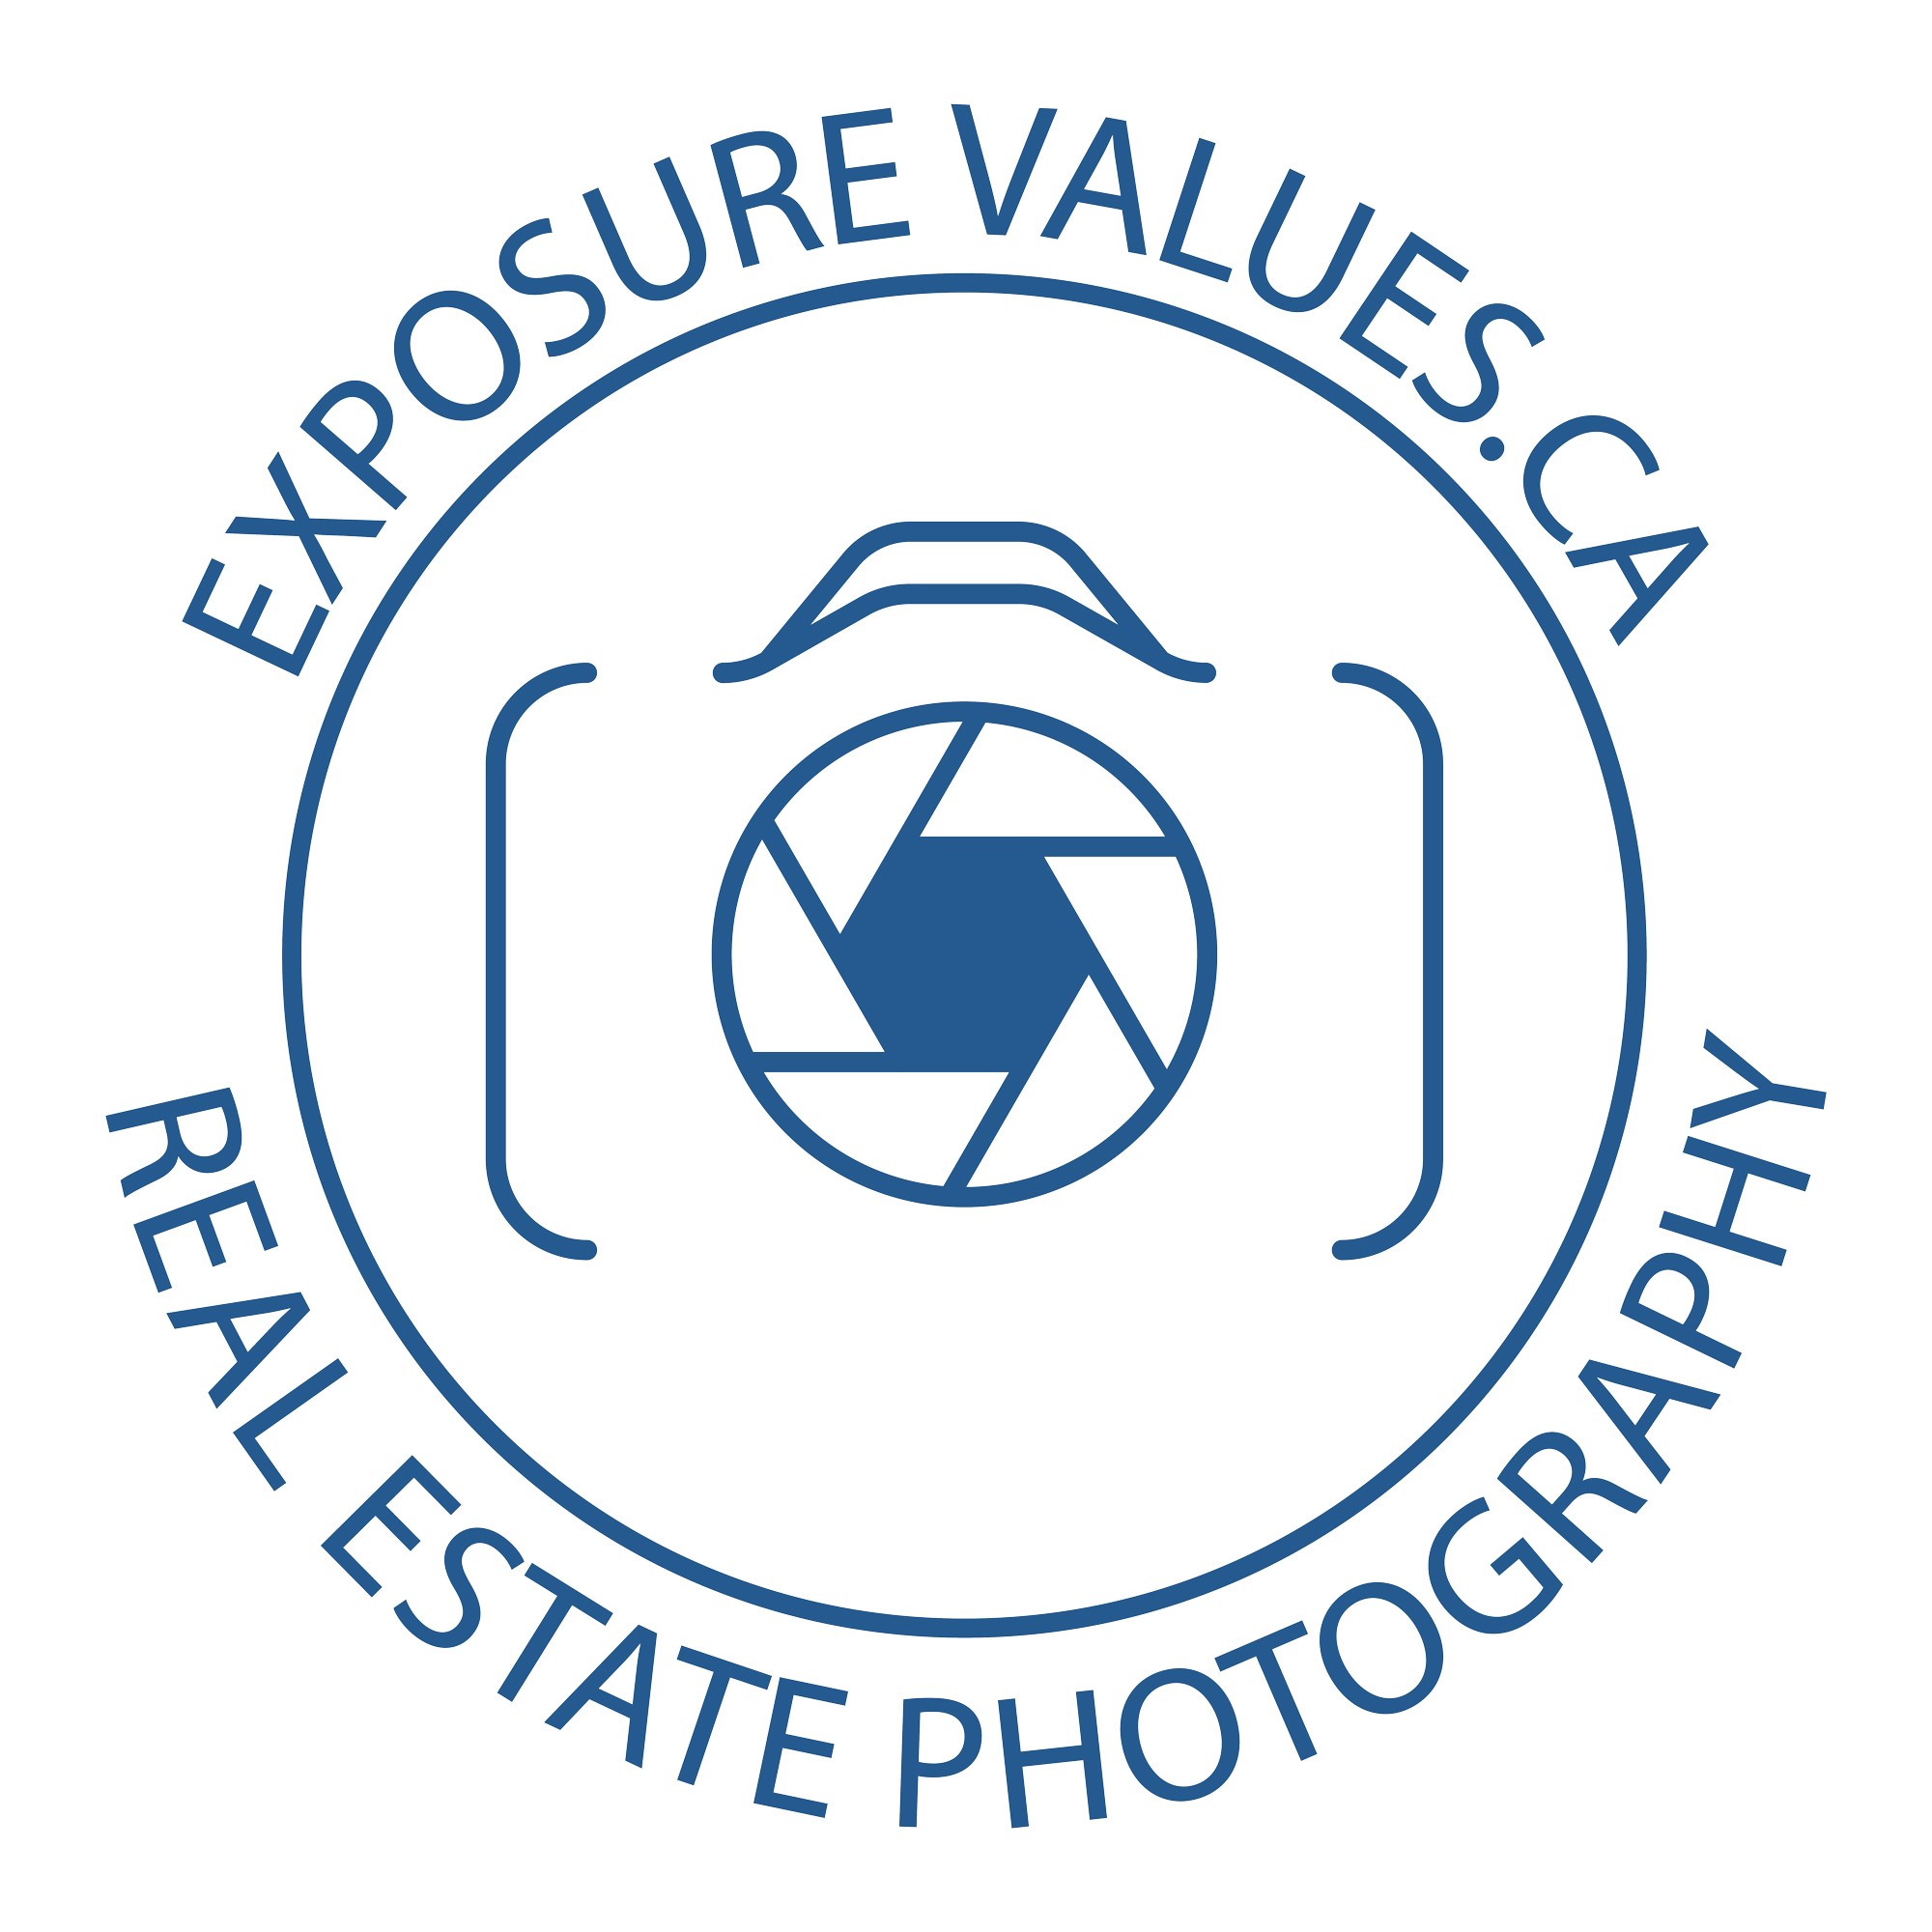 Exposure Values Real Estate Photography logo